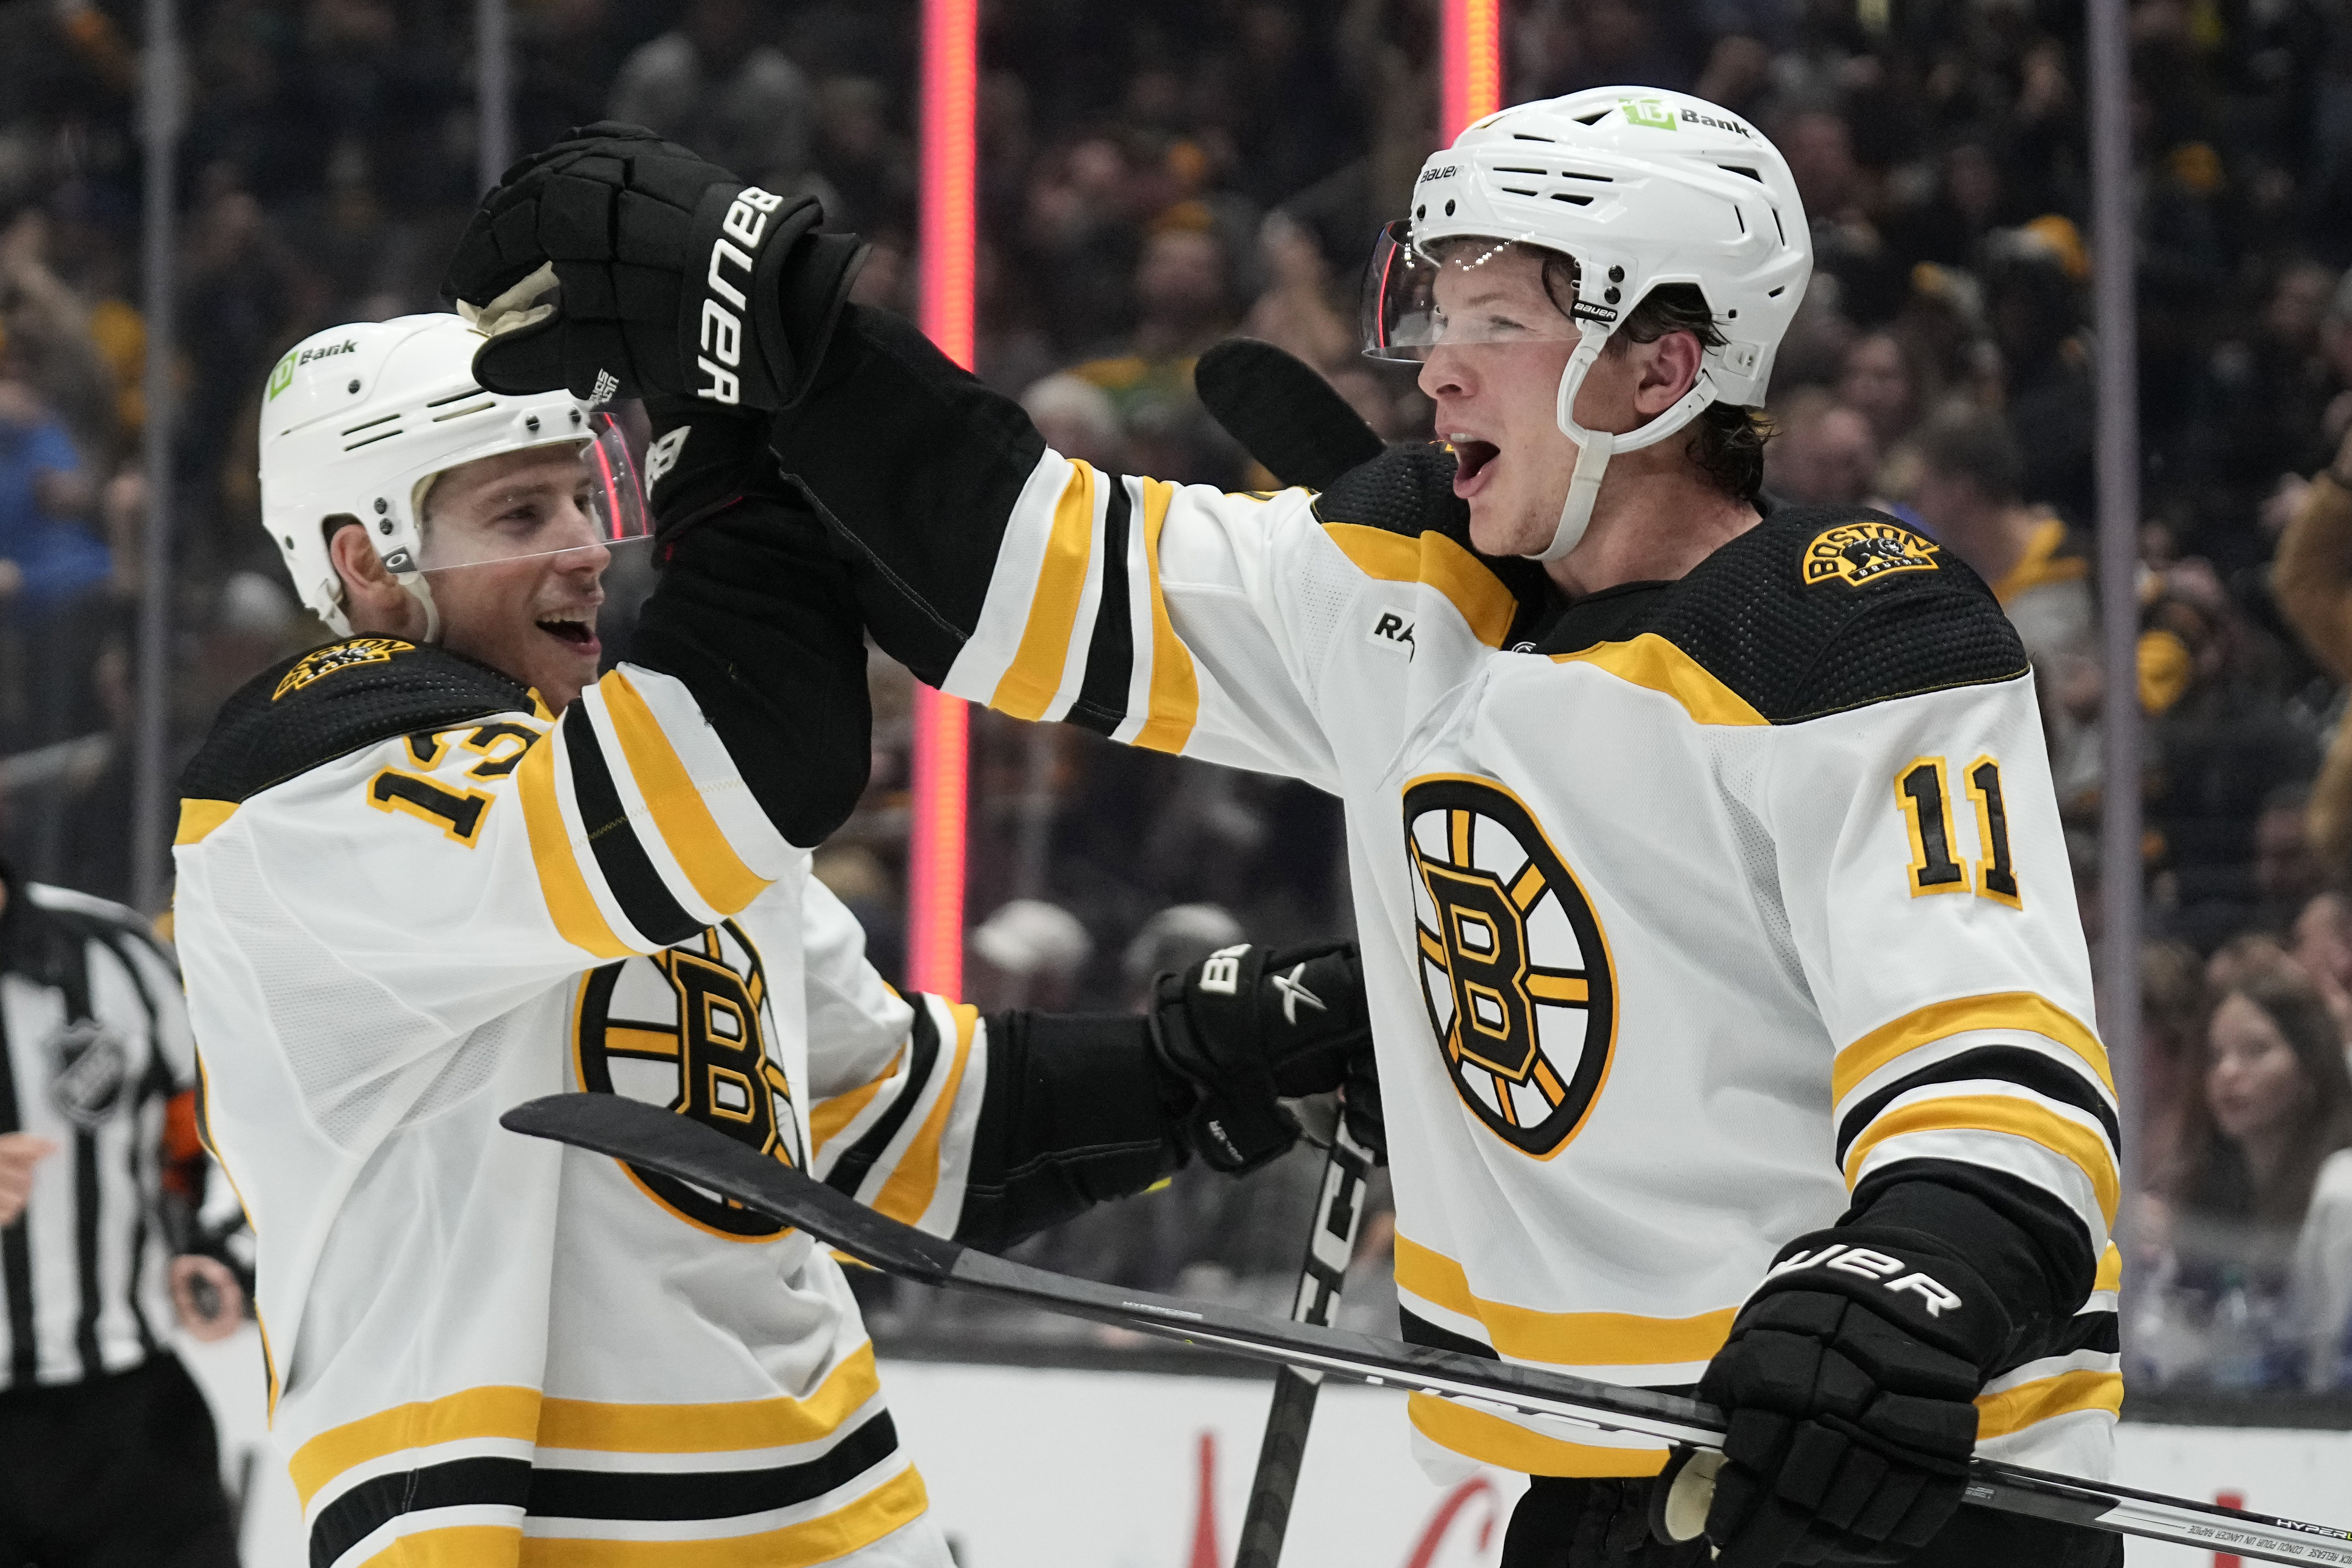 NBCSN Broadcast Shows Bruins Got Away With Too Many Men on Ice Just Before  Opening Power Play